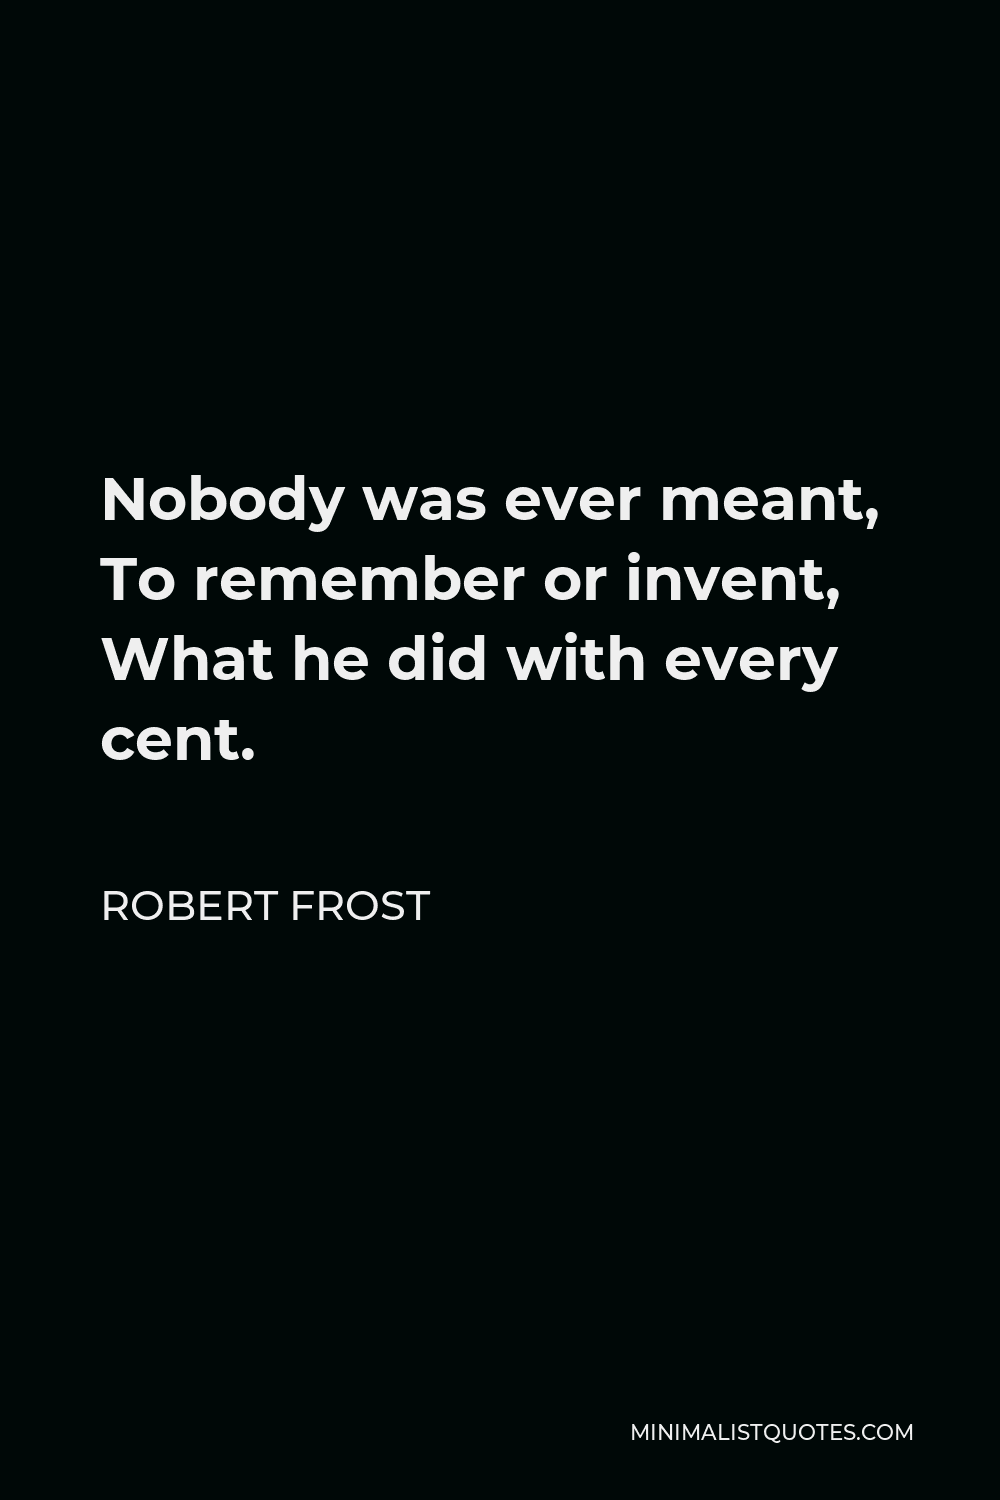 Robert Frost Quote - Nobody was ever meant, To remember or invent, What he did with every cent.